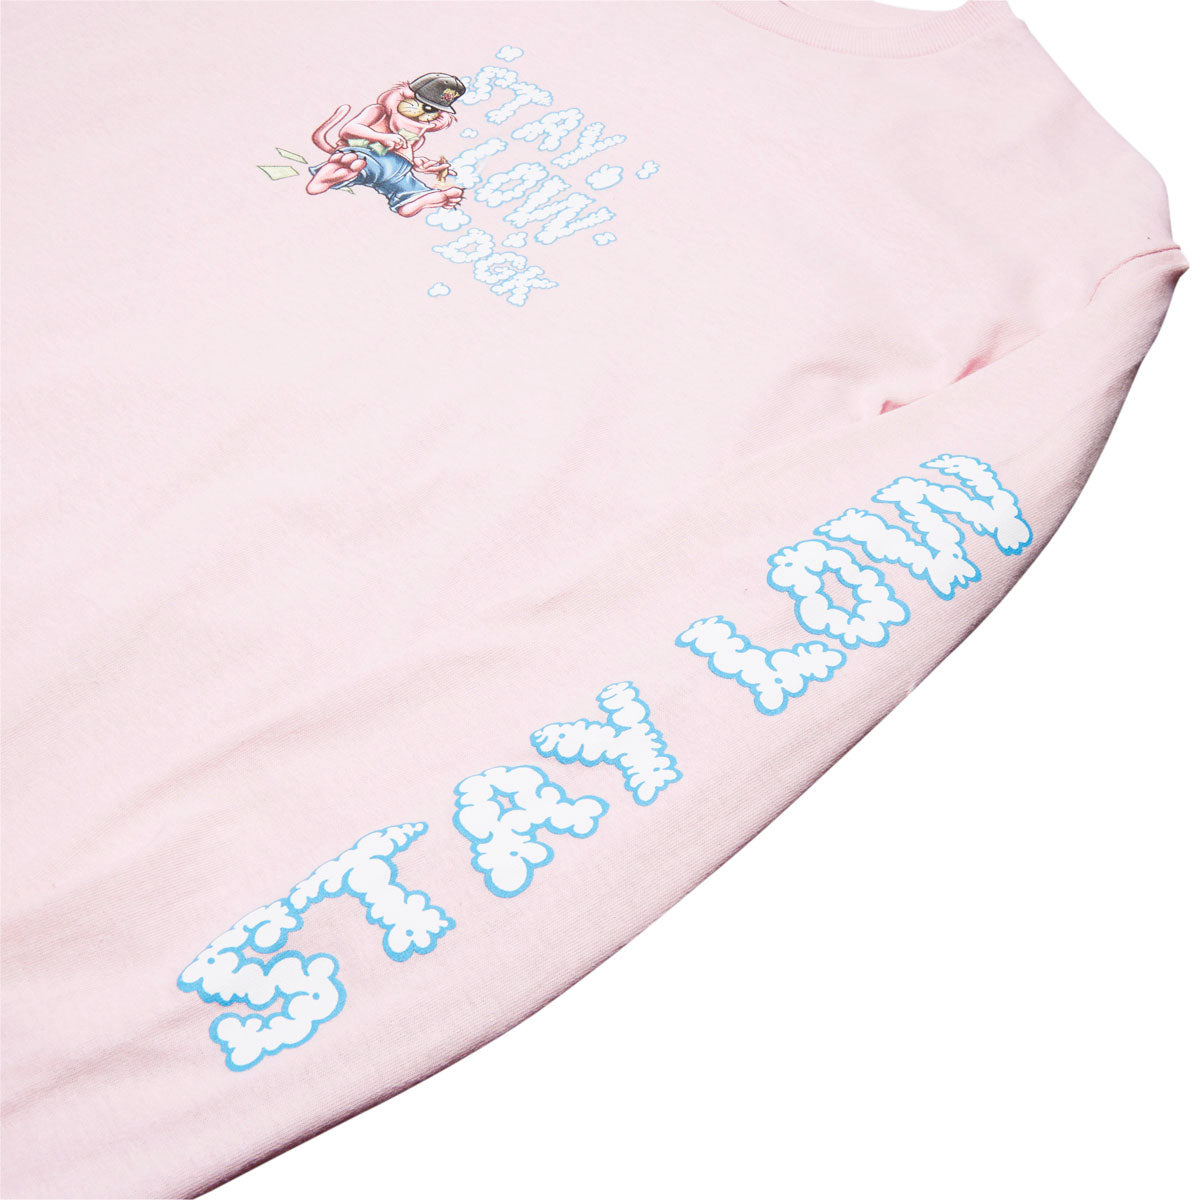 DGK Stay Low Long Sleeve T-Shirt - Pink image 3